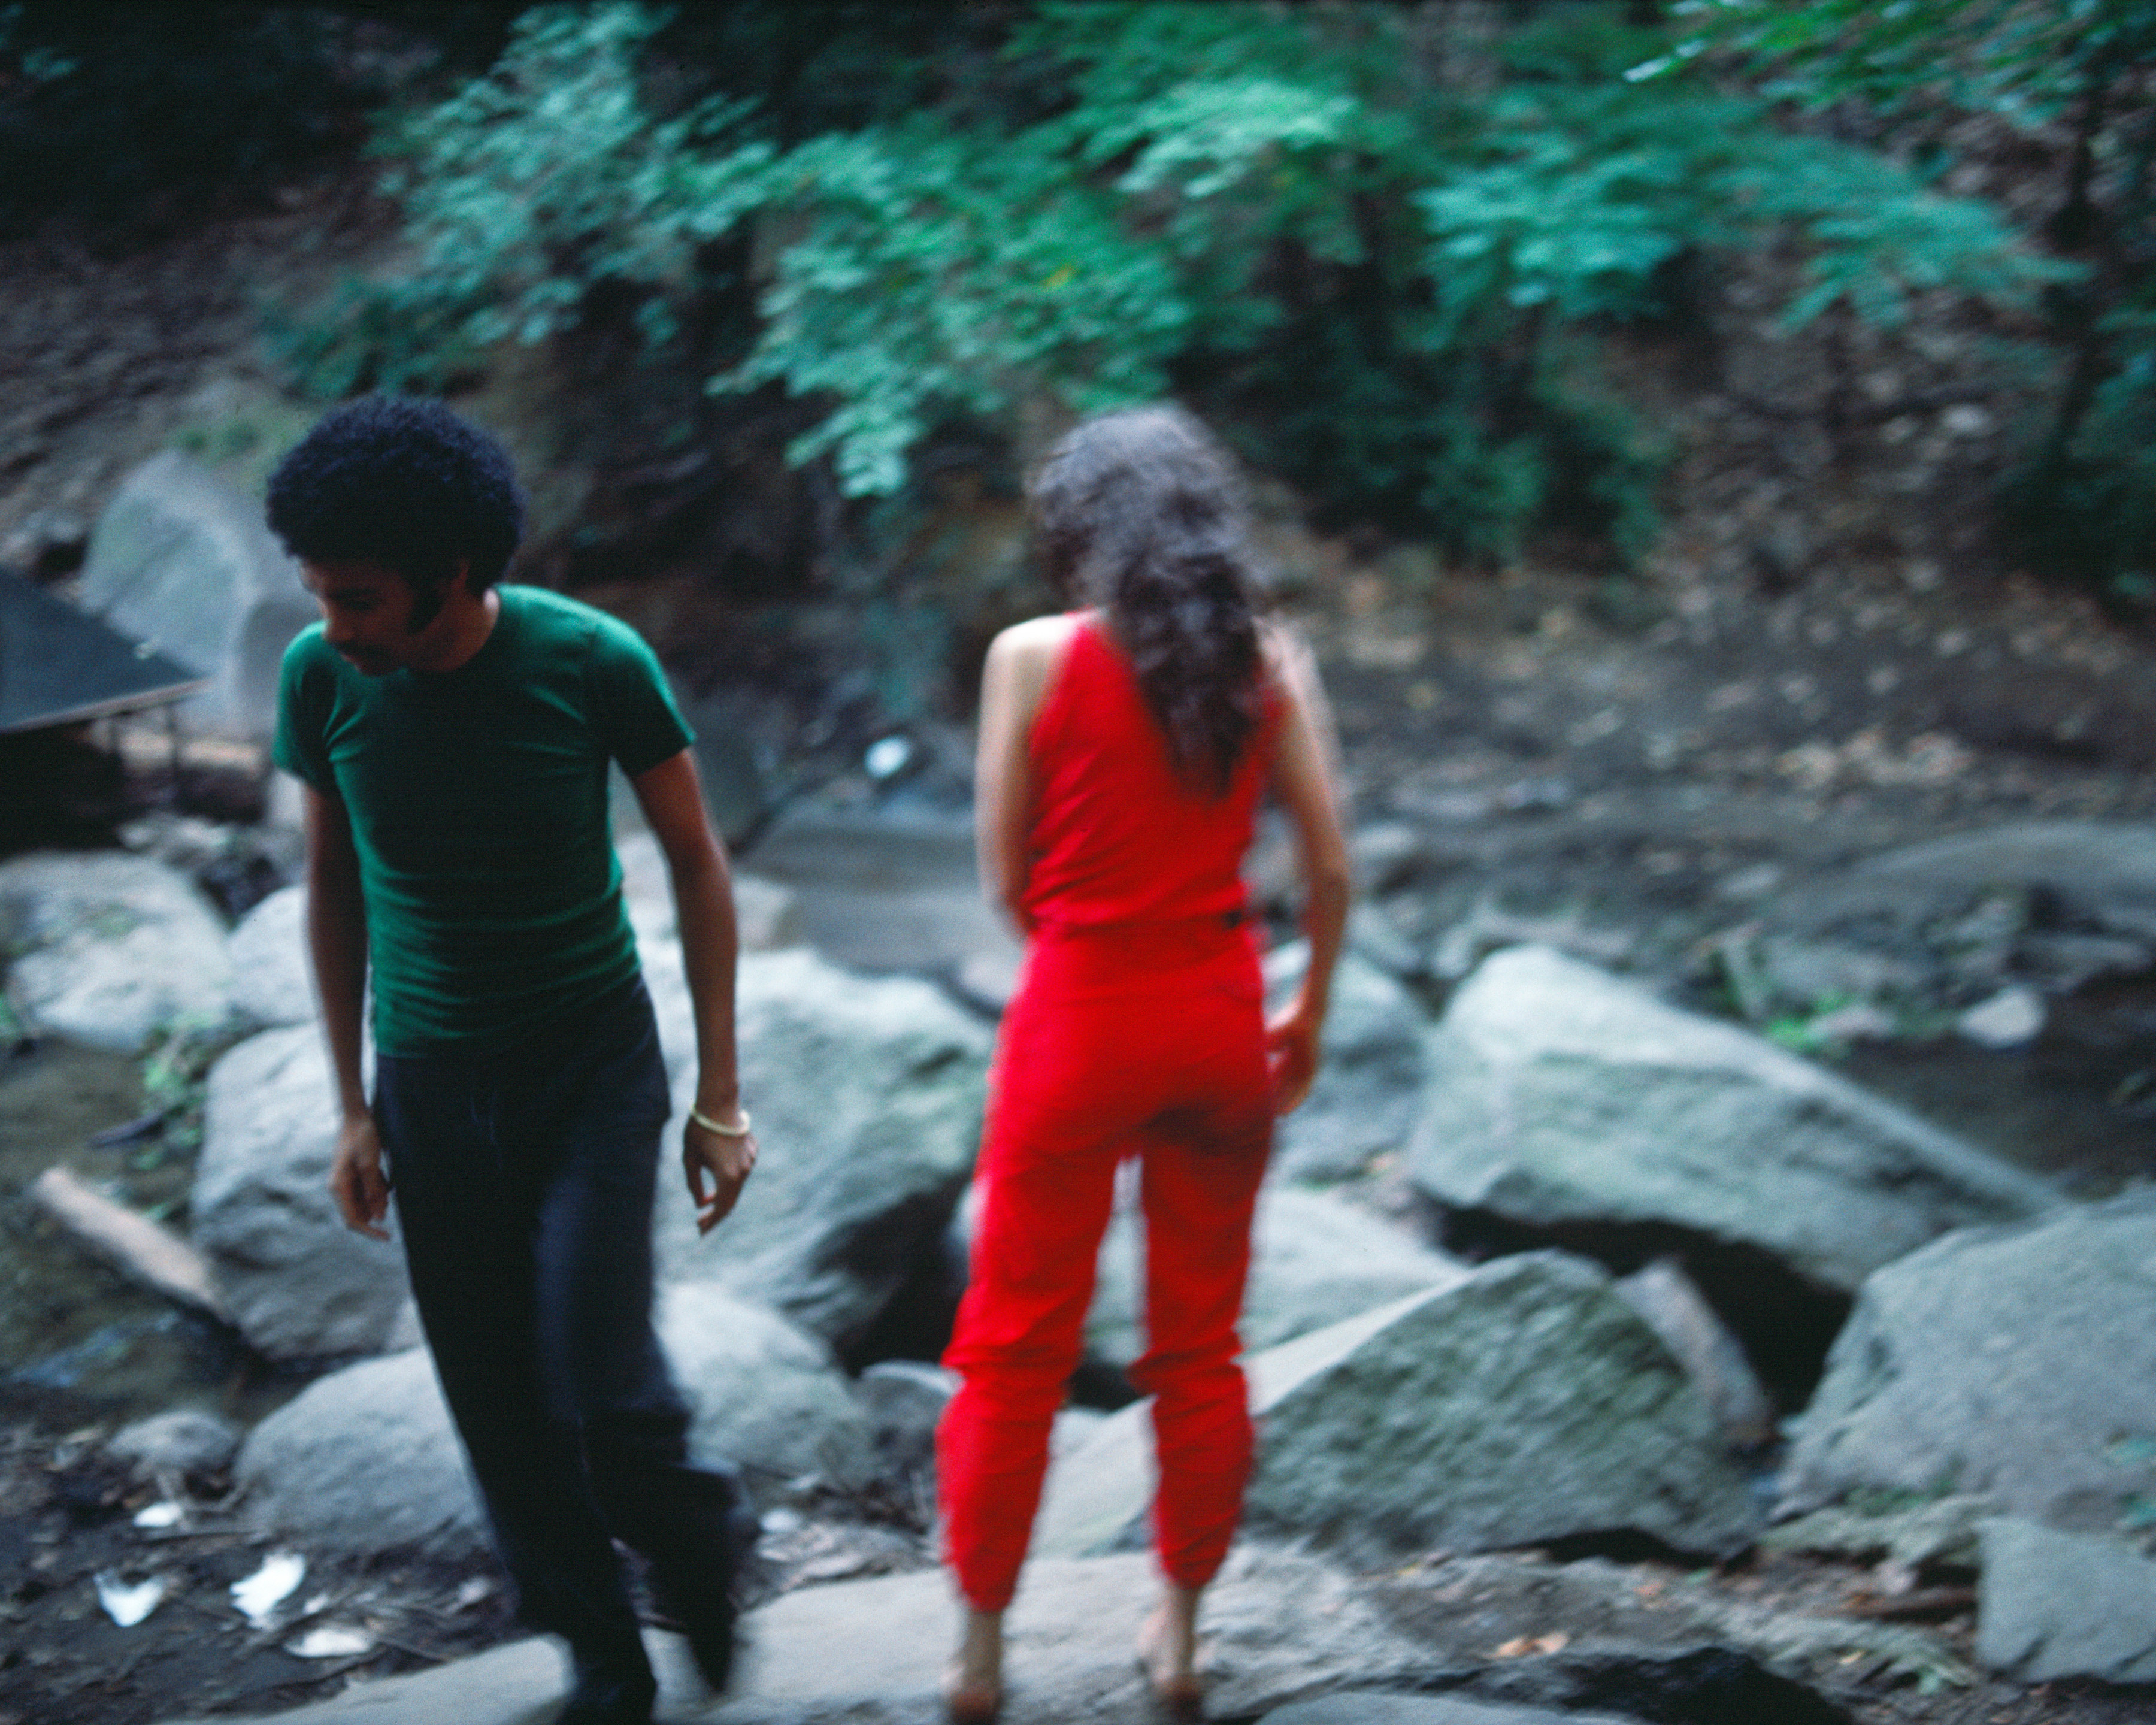 Rivers, First Draft: The Young Man pulls away, 1982/2015, Digital C-print from Kodachrome 35mm slides in 48 parts, 16h x 20w in (40.64h x 50.80w cm)